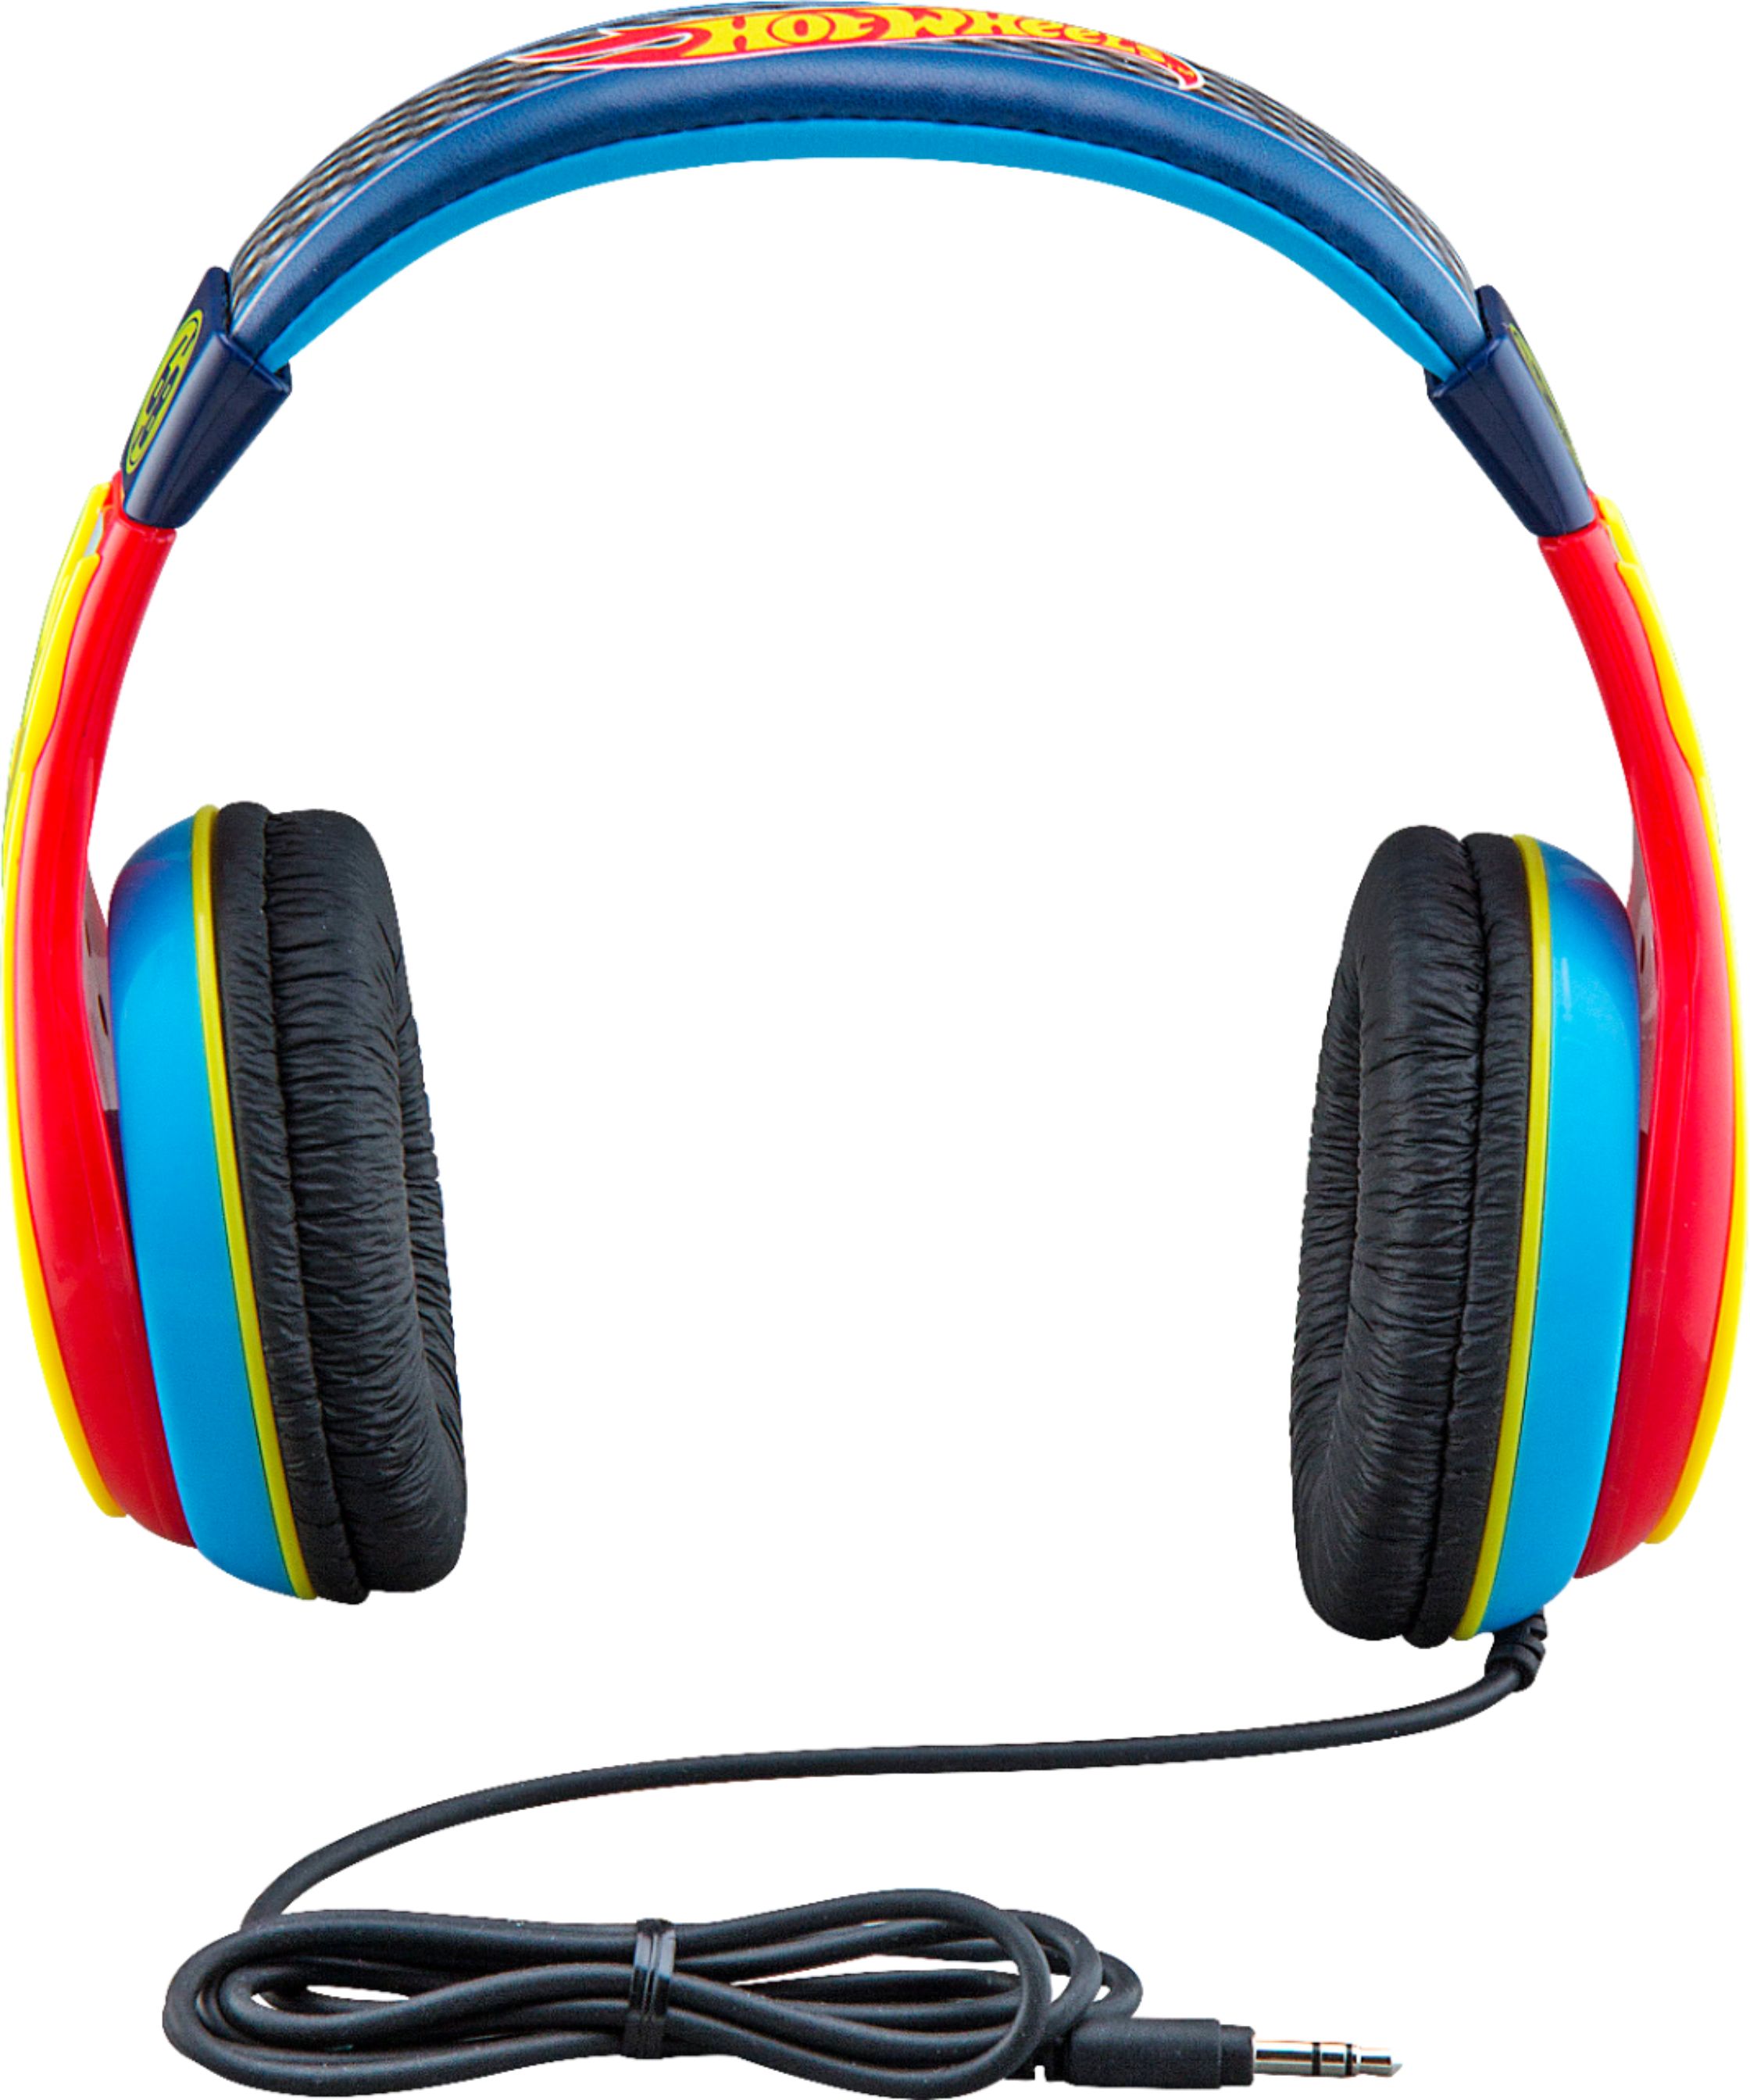 Left View: eKids Hot Wheels Wired Over the Ear Headphones - yellow